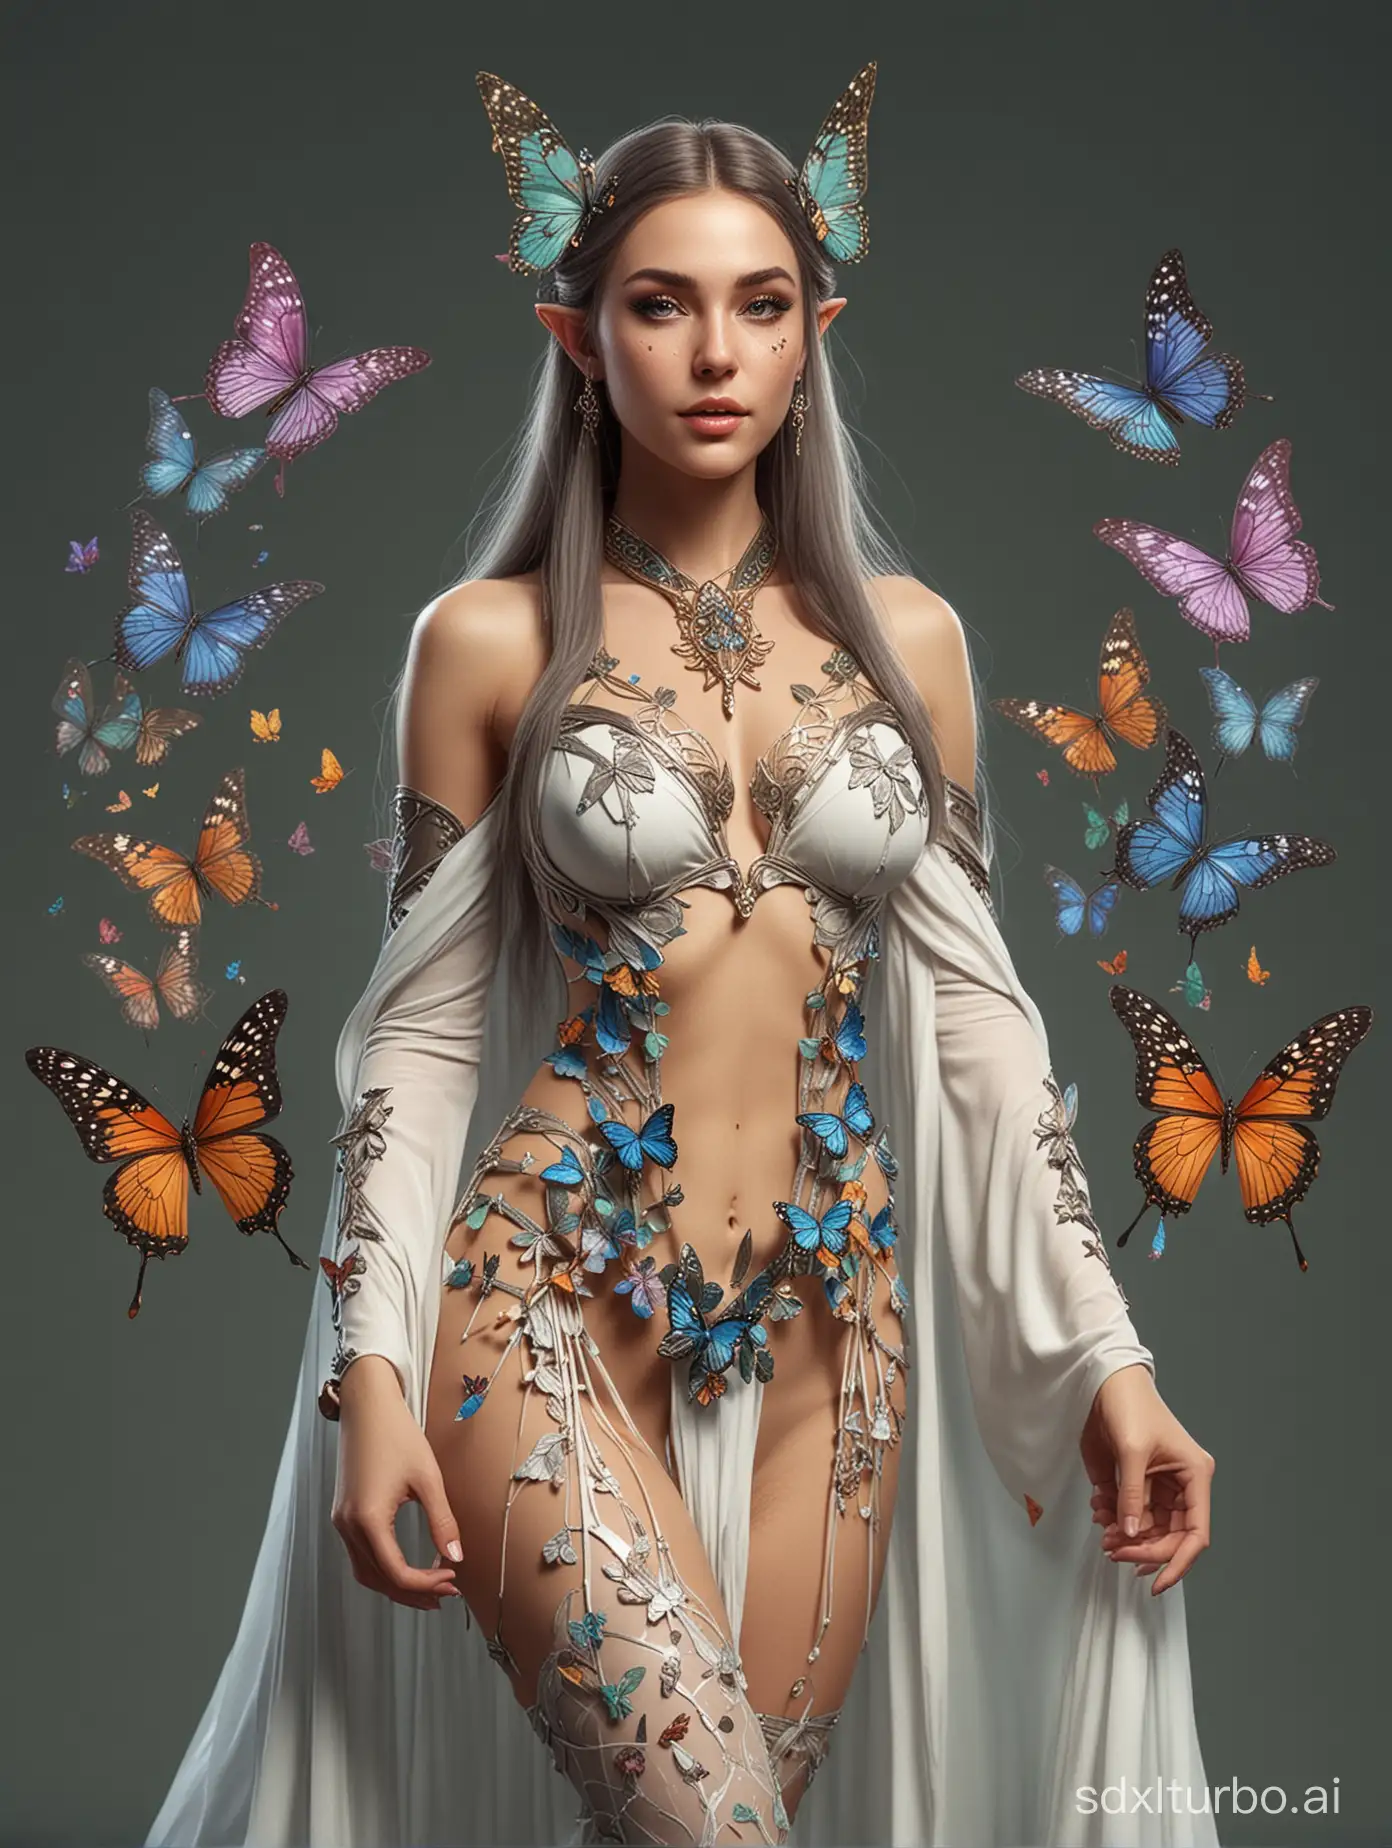 elven priestess in a revealing outfit decorated with butterflies, "flat background" "full body"